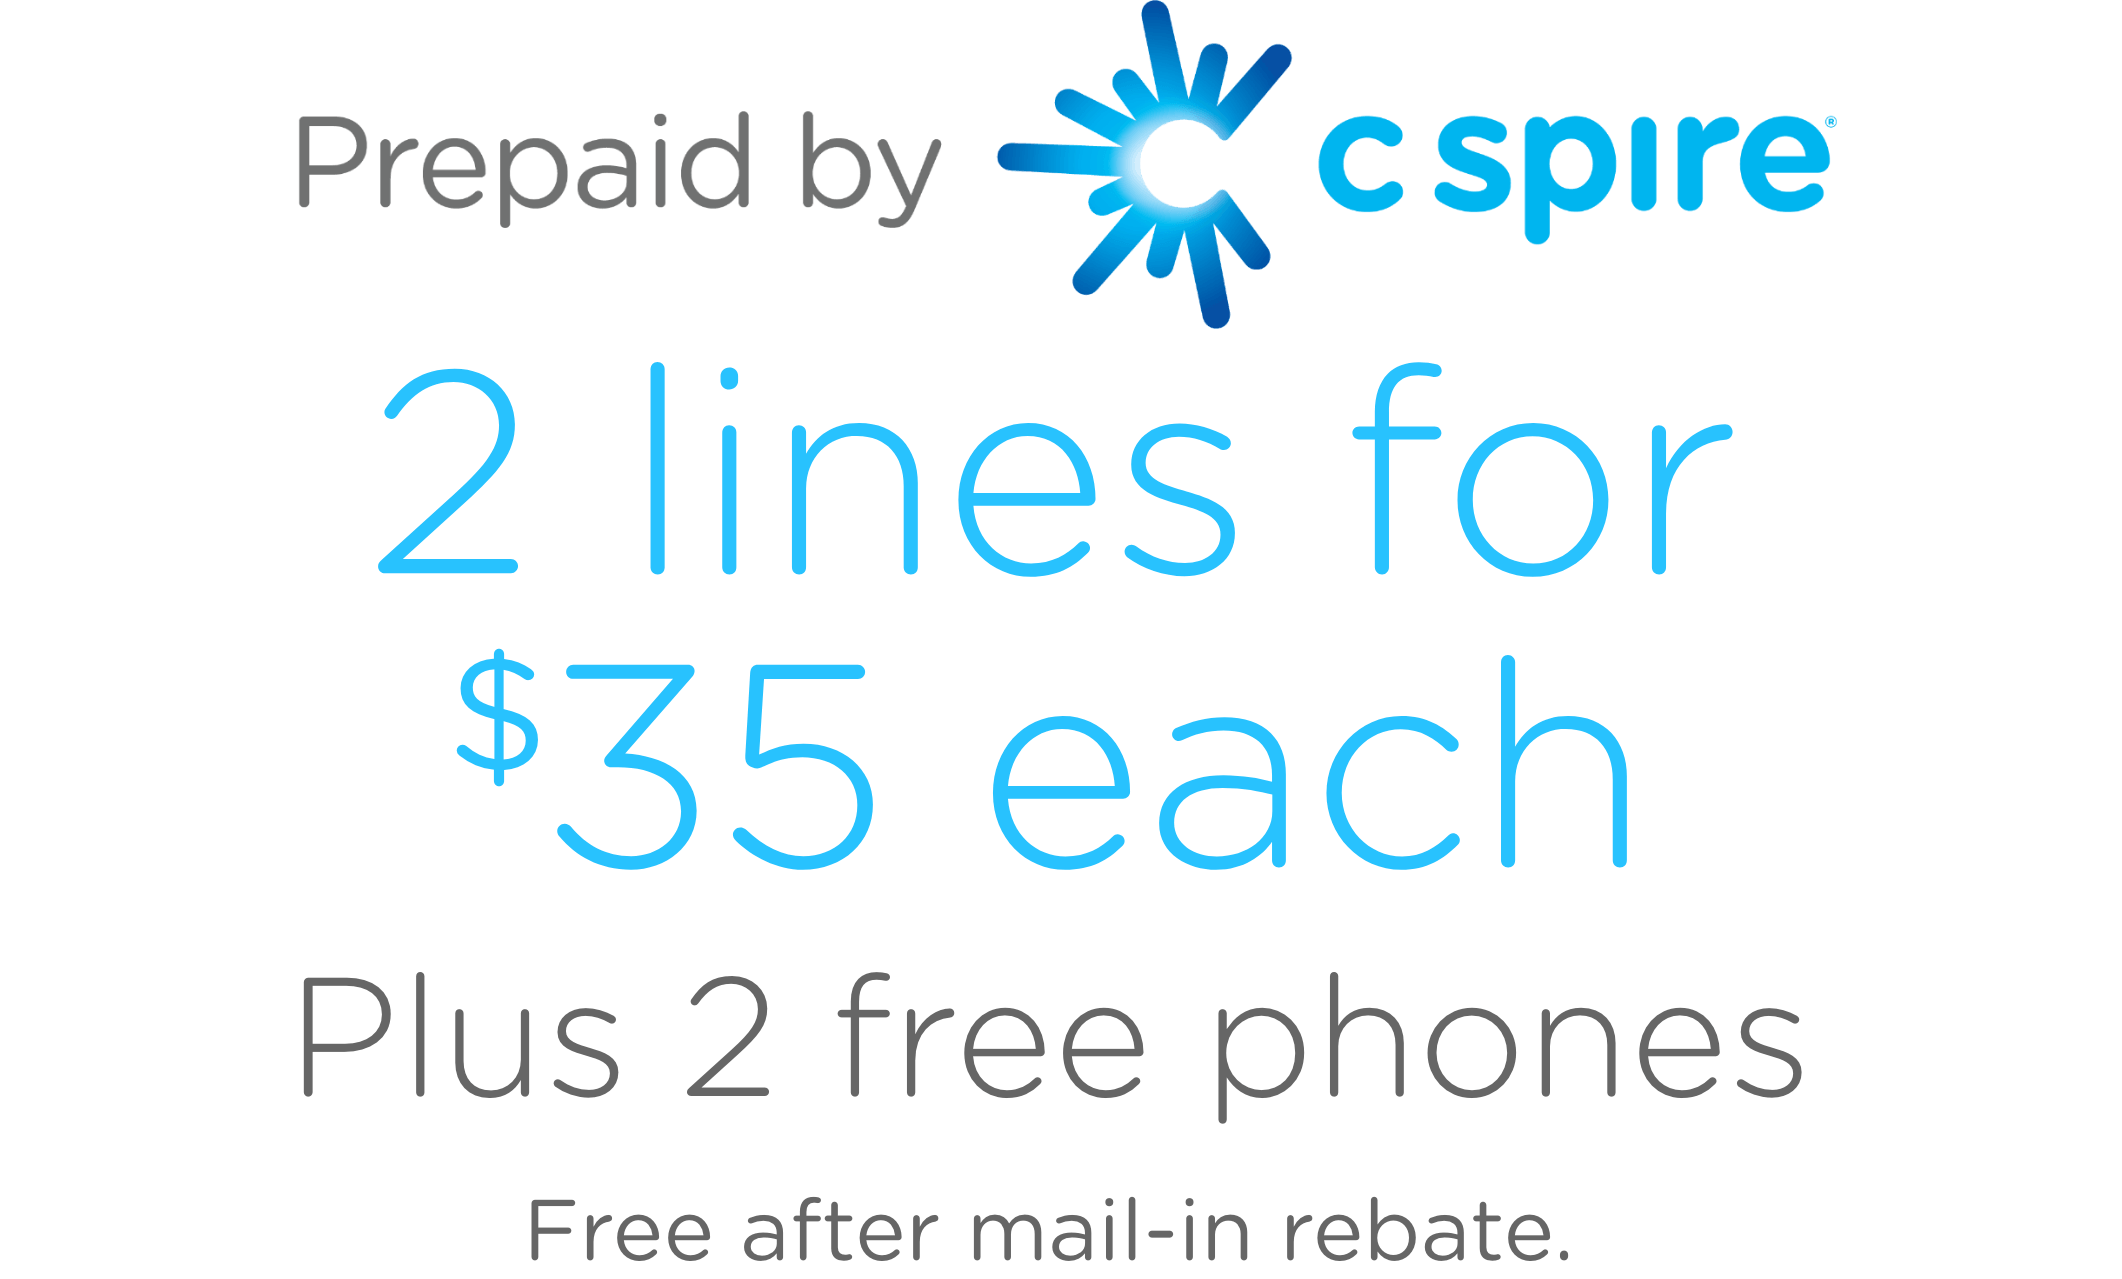 Wireless Phones Unlimited Plans Tablets And Watches C Spire Wireless